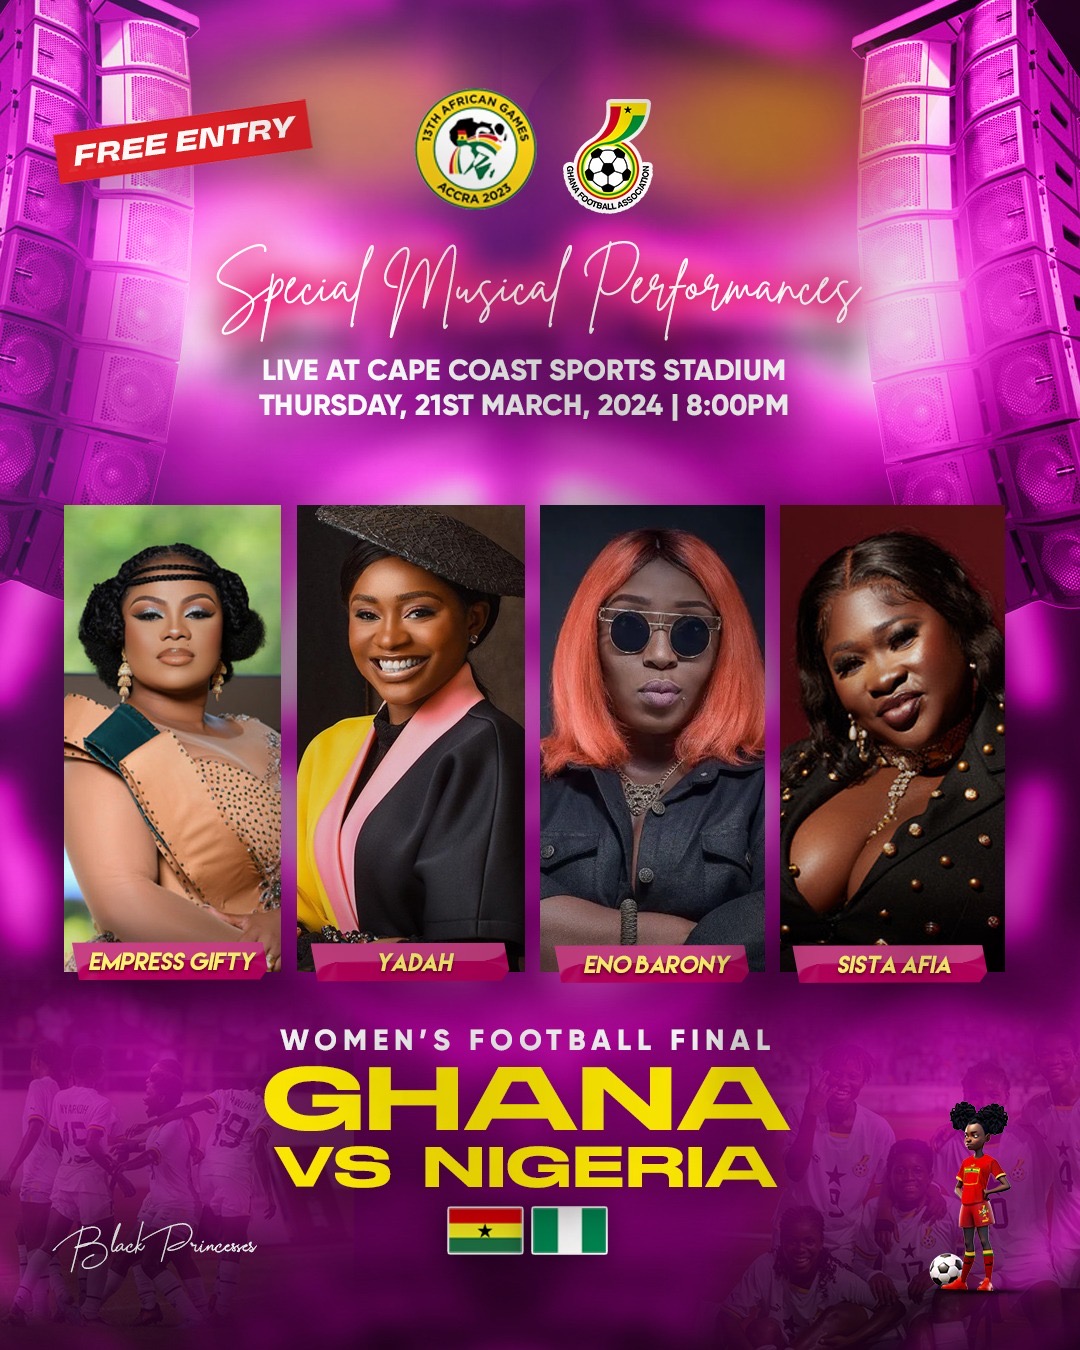 Ghana FA launches fan experience centers ahead of African Games Women’s final